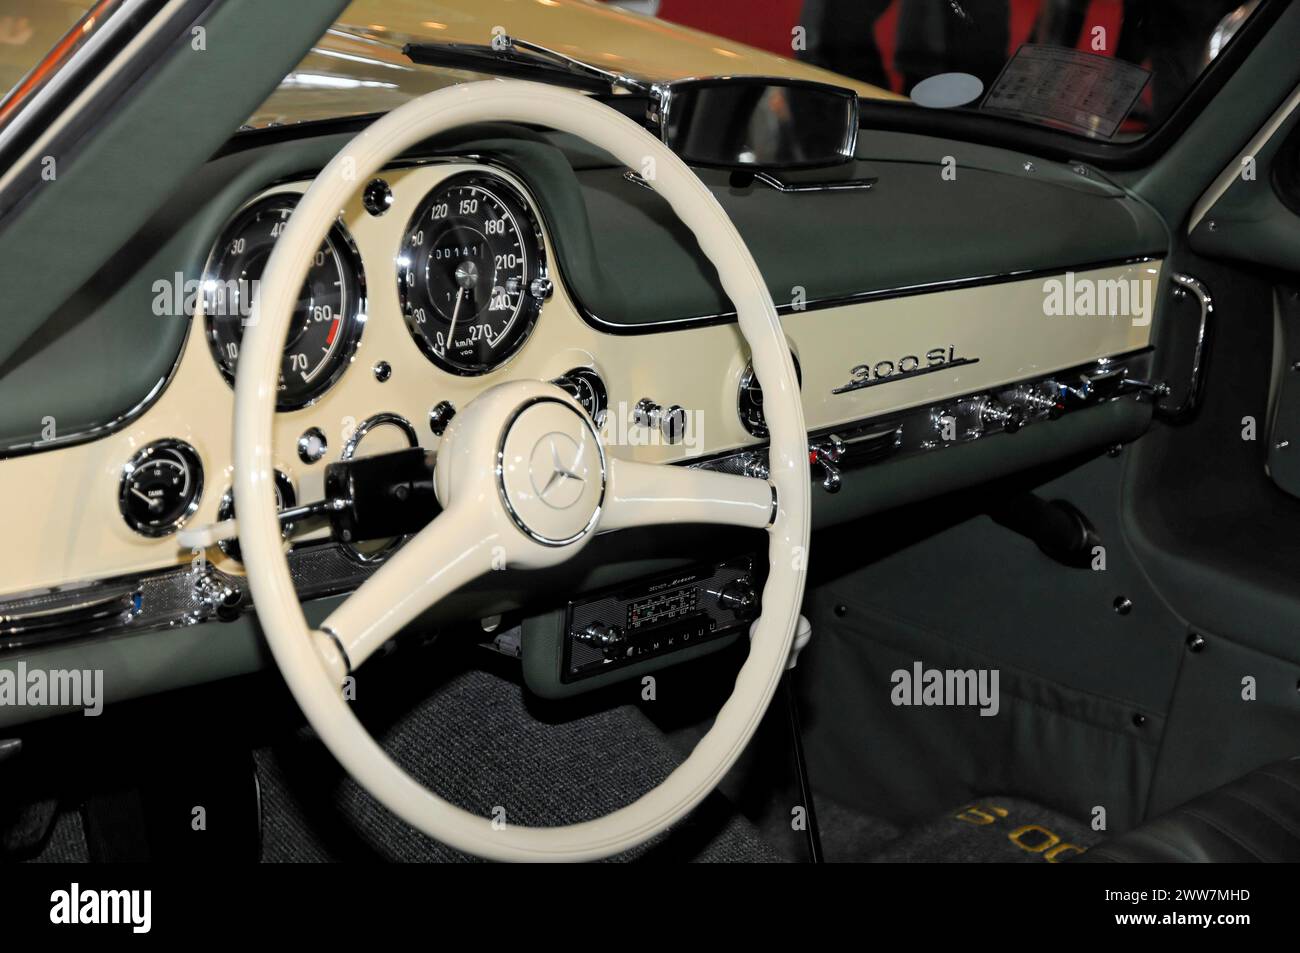 RETRO CLASSICS 2010, Stuttgart Trade Fair, Interior of a classic Mercedes-Benz 300 SL, with steering wheel and wood-panelled dashboard, Stuttgart Stock Photo